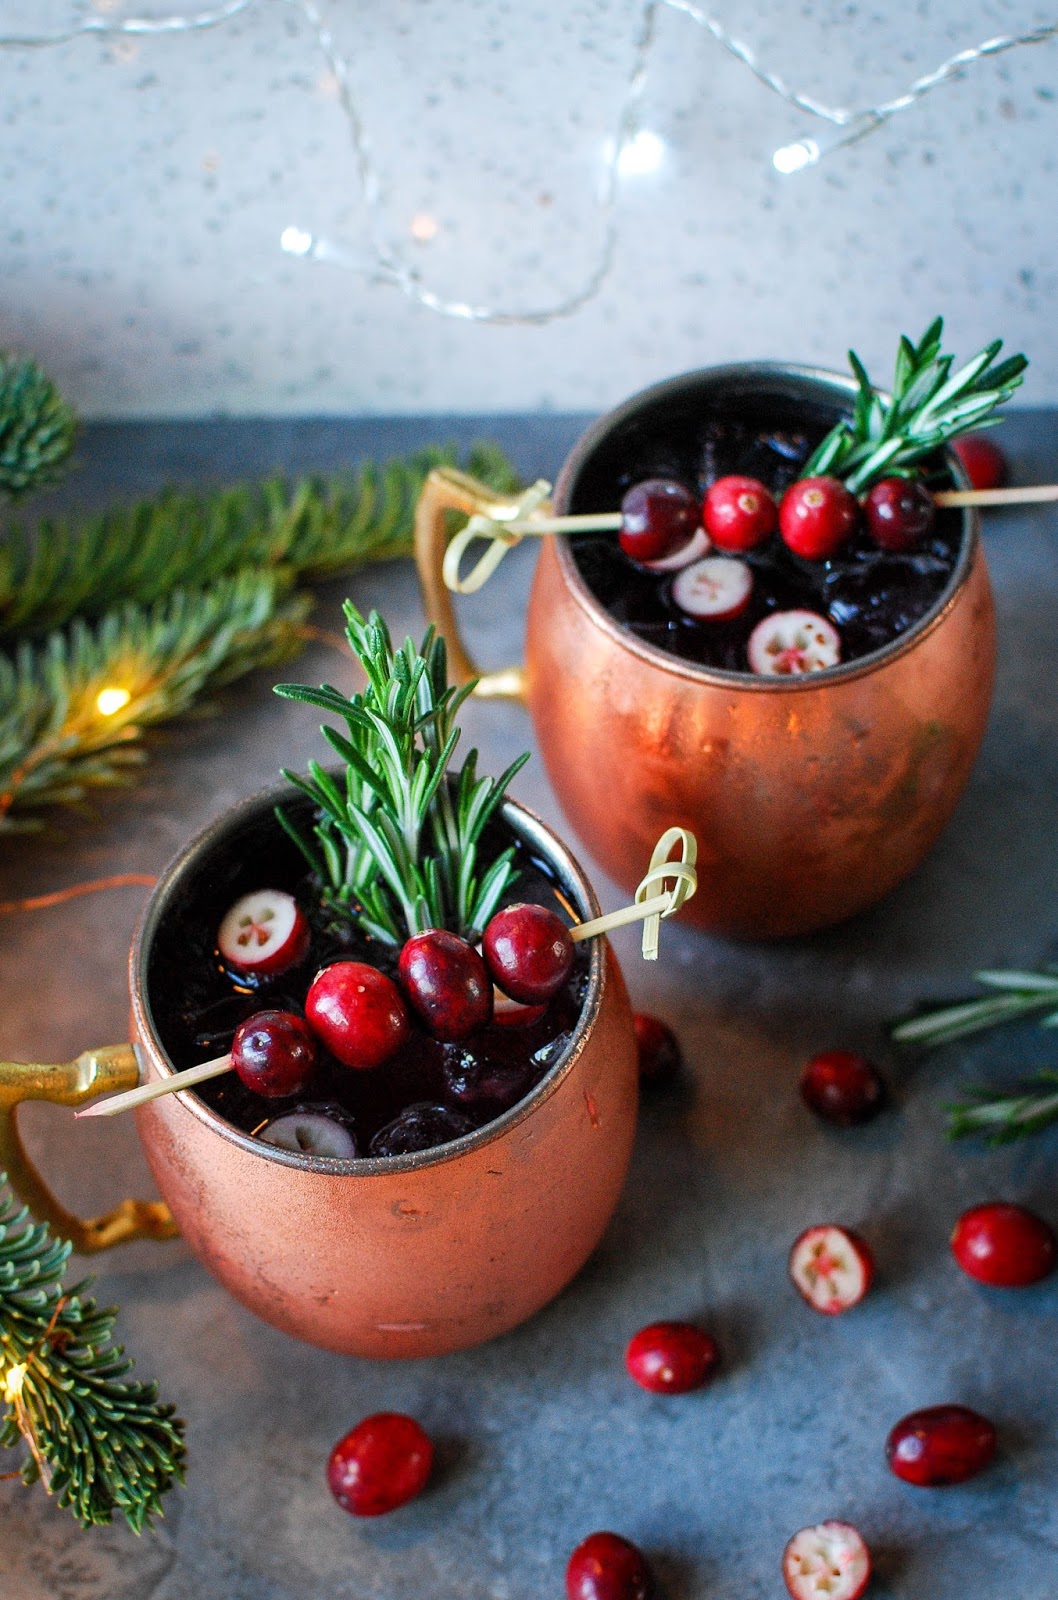 A delighfully festive take on a classic cocktail using Fentimans botanically brewed mixers.